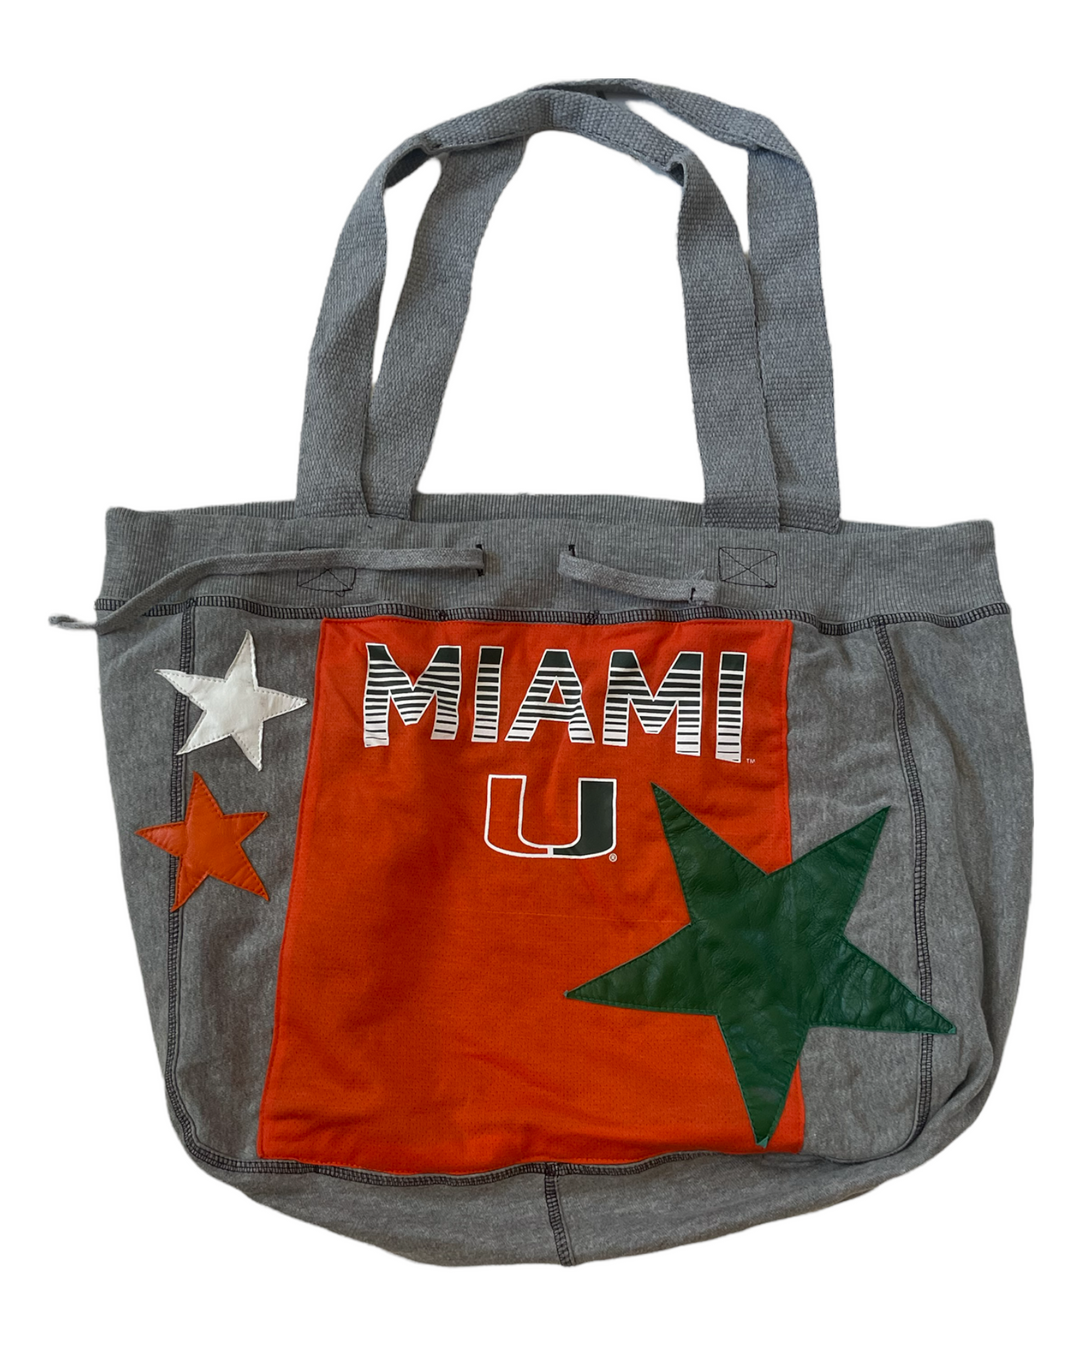 Patched Up Miami Tote